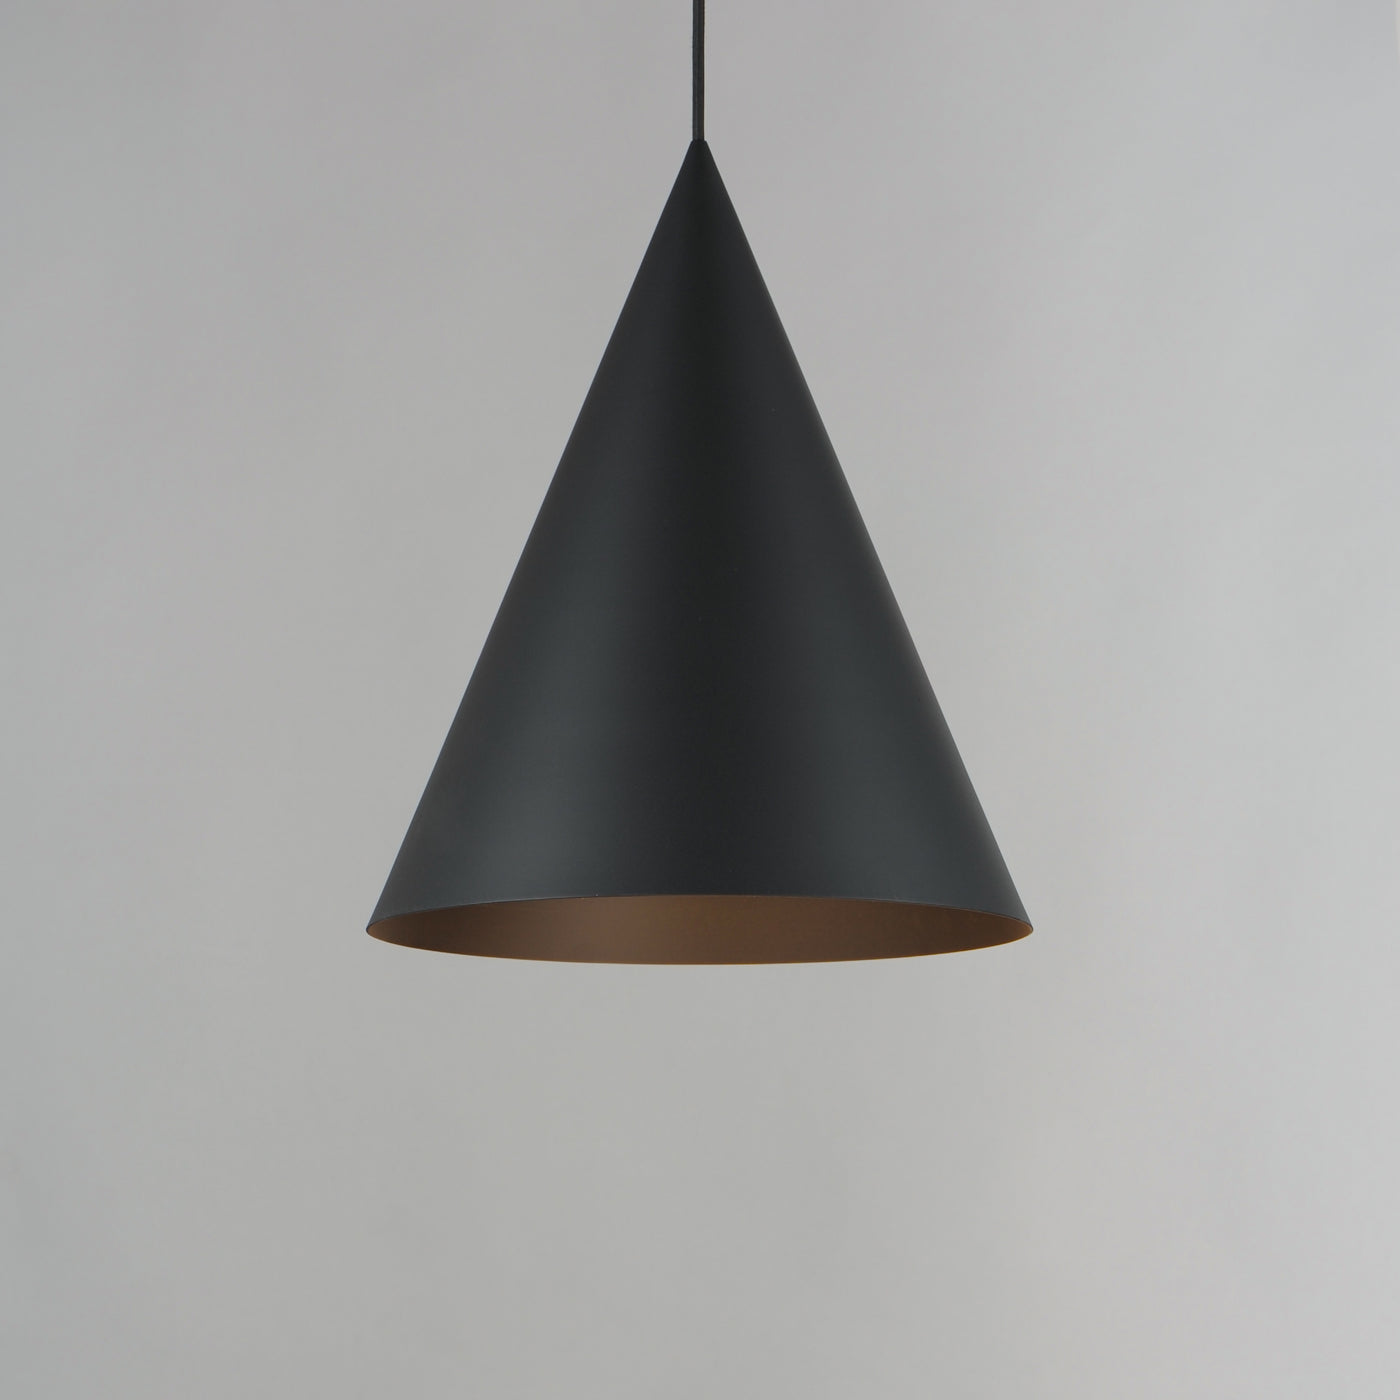 Steel Conical Shade Pendant